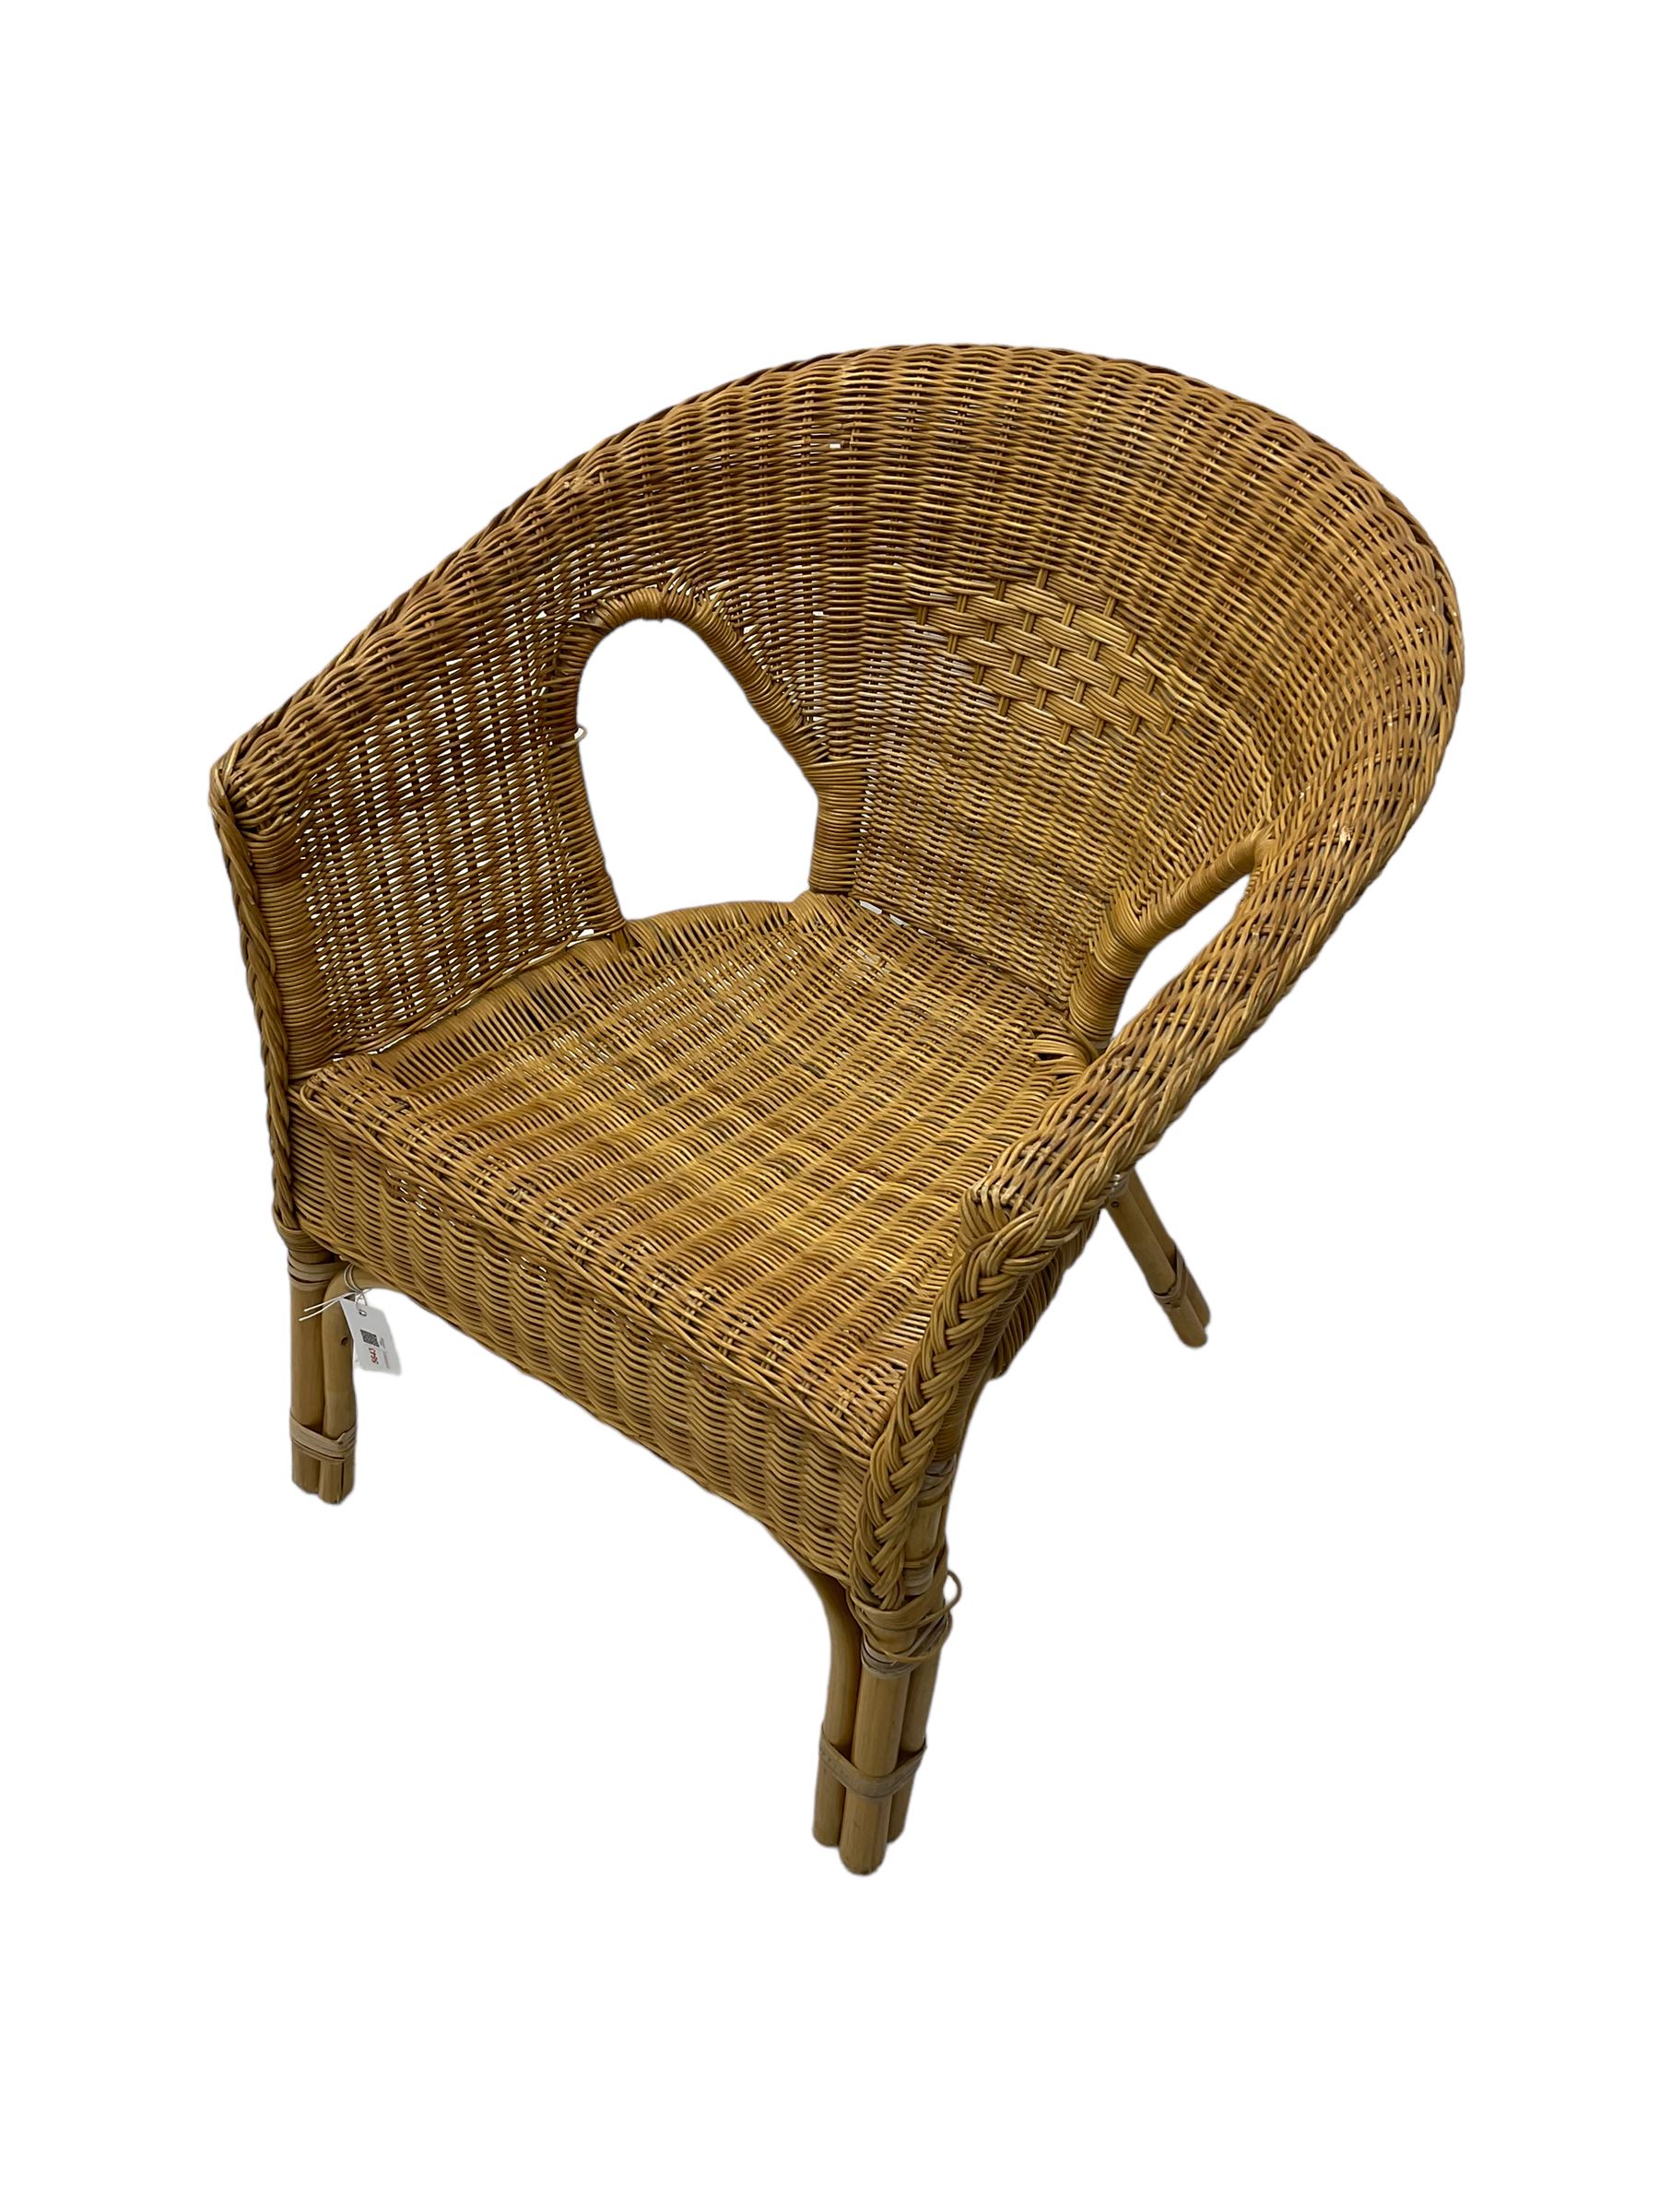 Wicker tub shaped armchair - Image 2 of 2